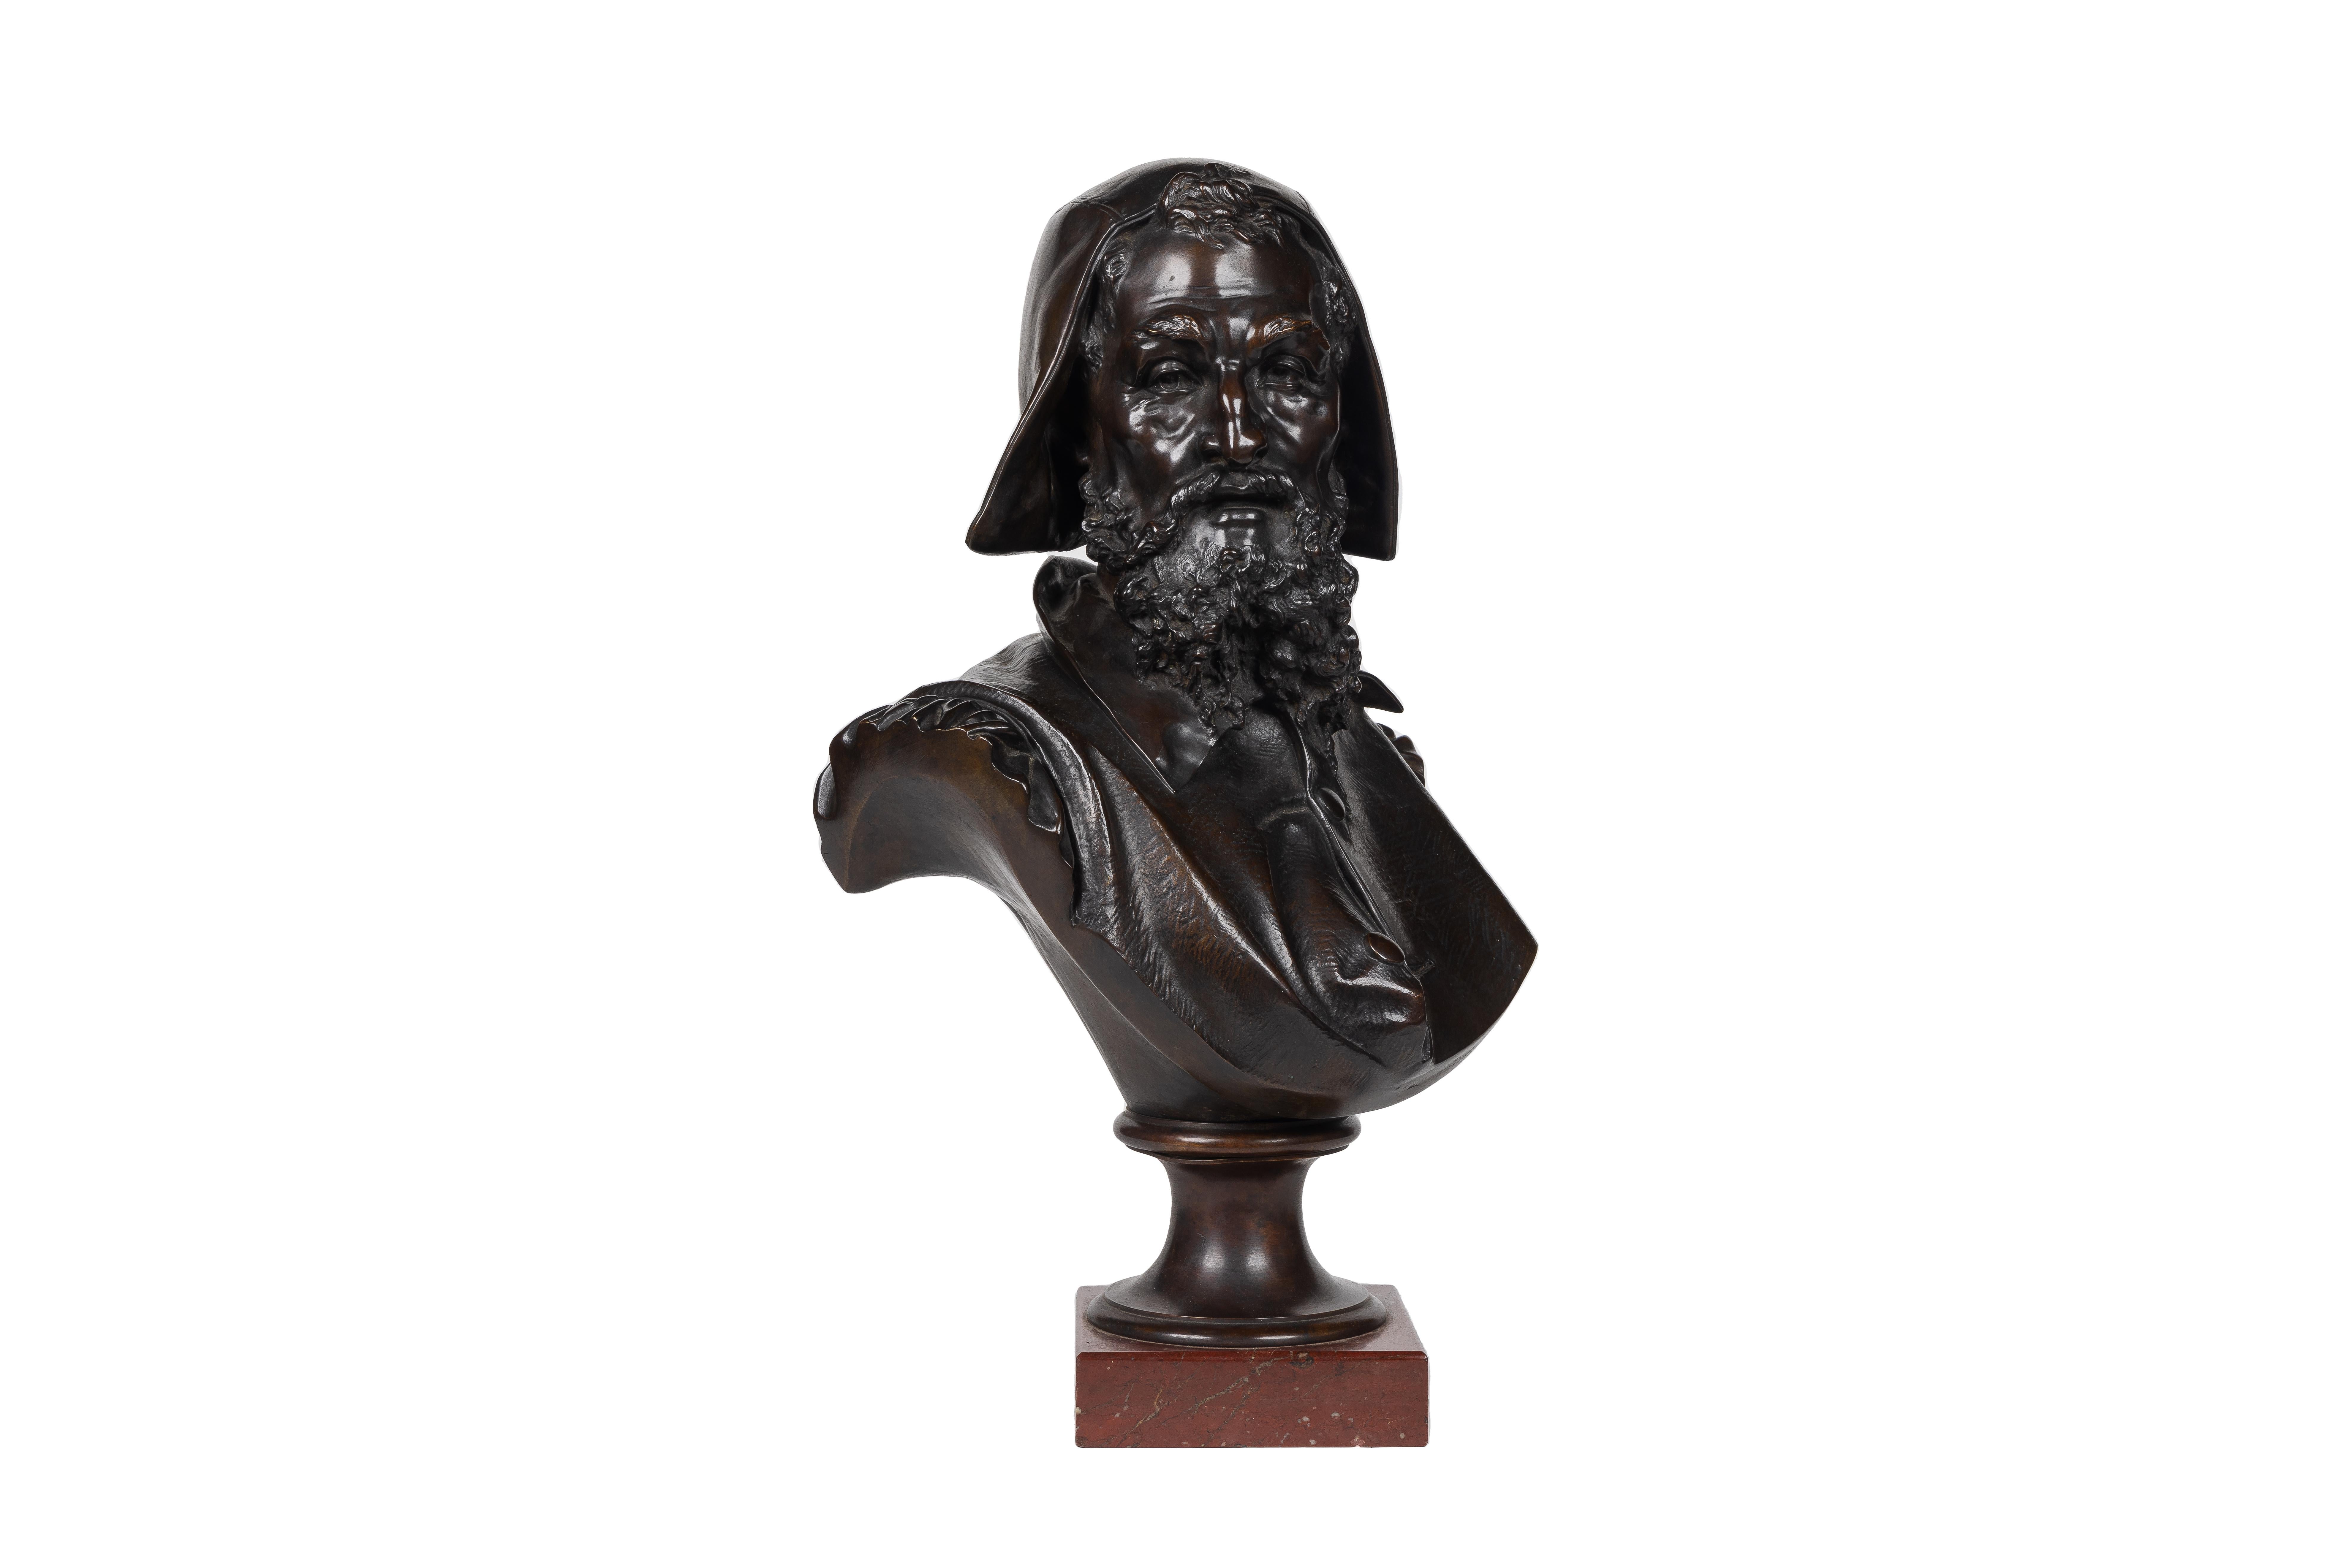 Albert-Ernest Carrier-Belleuse, (1824 1887)

A Rare and Important Patinated Bronze Bust of Michelangelo On A Rouge Marble Base.

Presenting an extraordinary and highly collectible masterpiece, this rare and important patinated bronze bust of